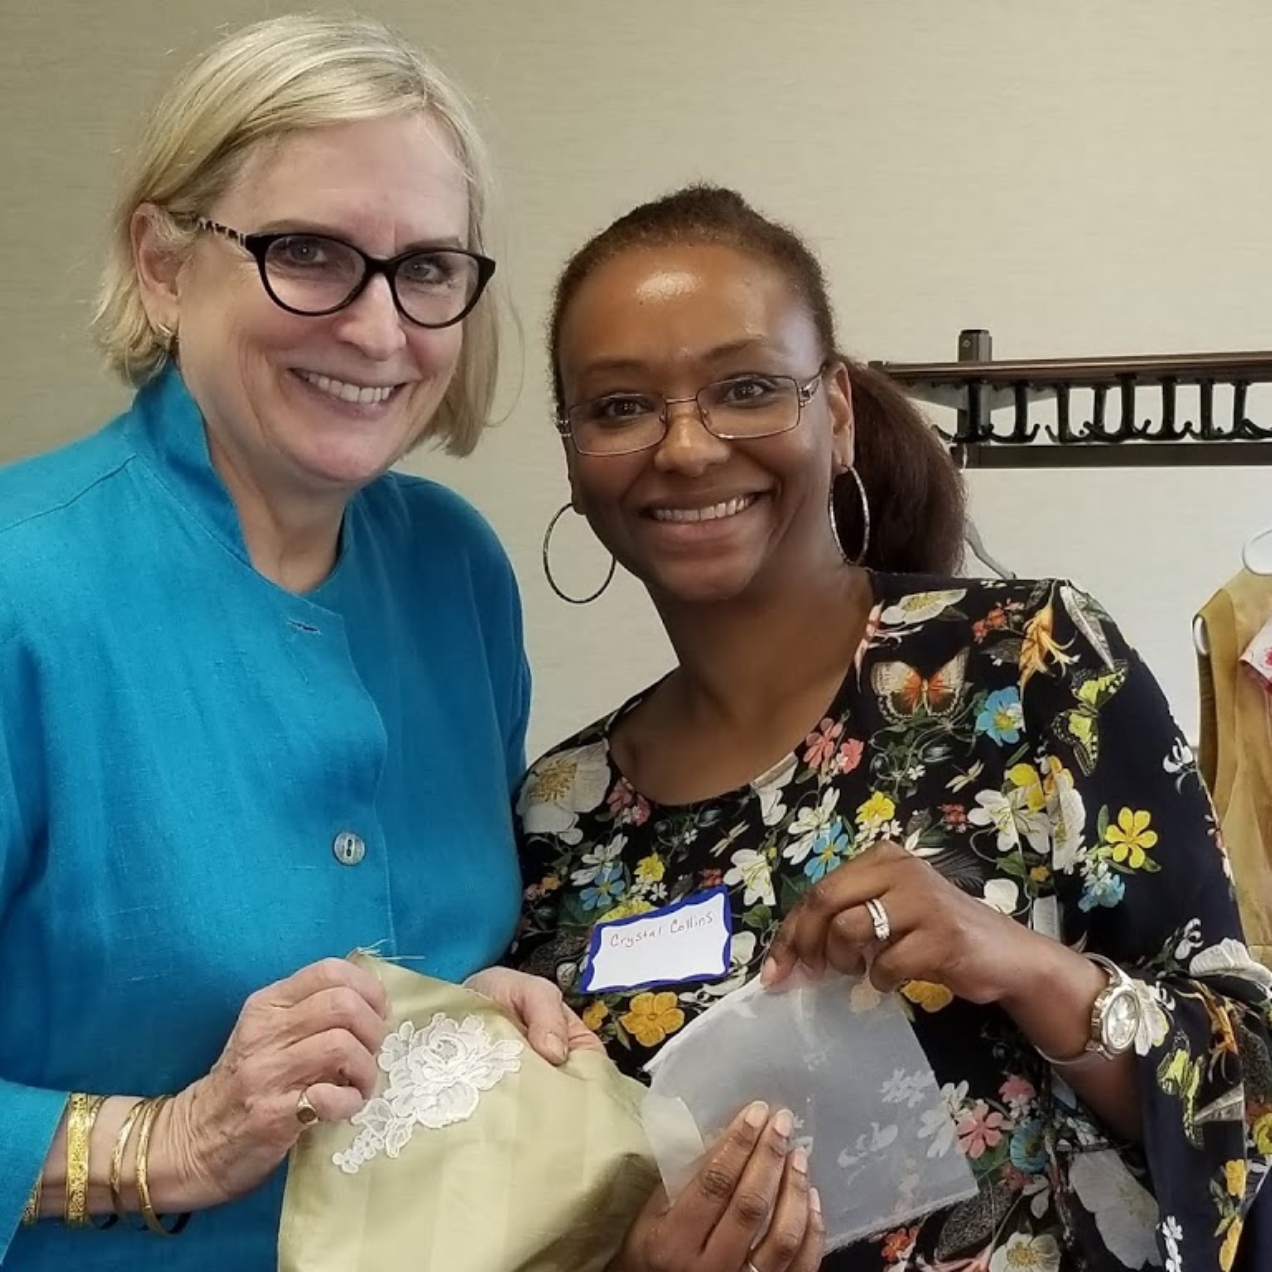 The Maryland Chapter of the American Sewing Guild’s Saturday Spring Sew Fun Event with Susan Khalje